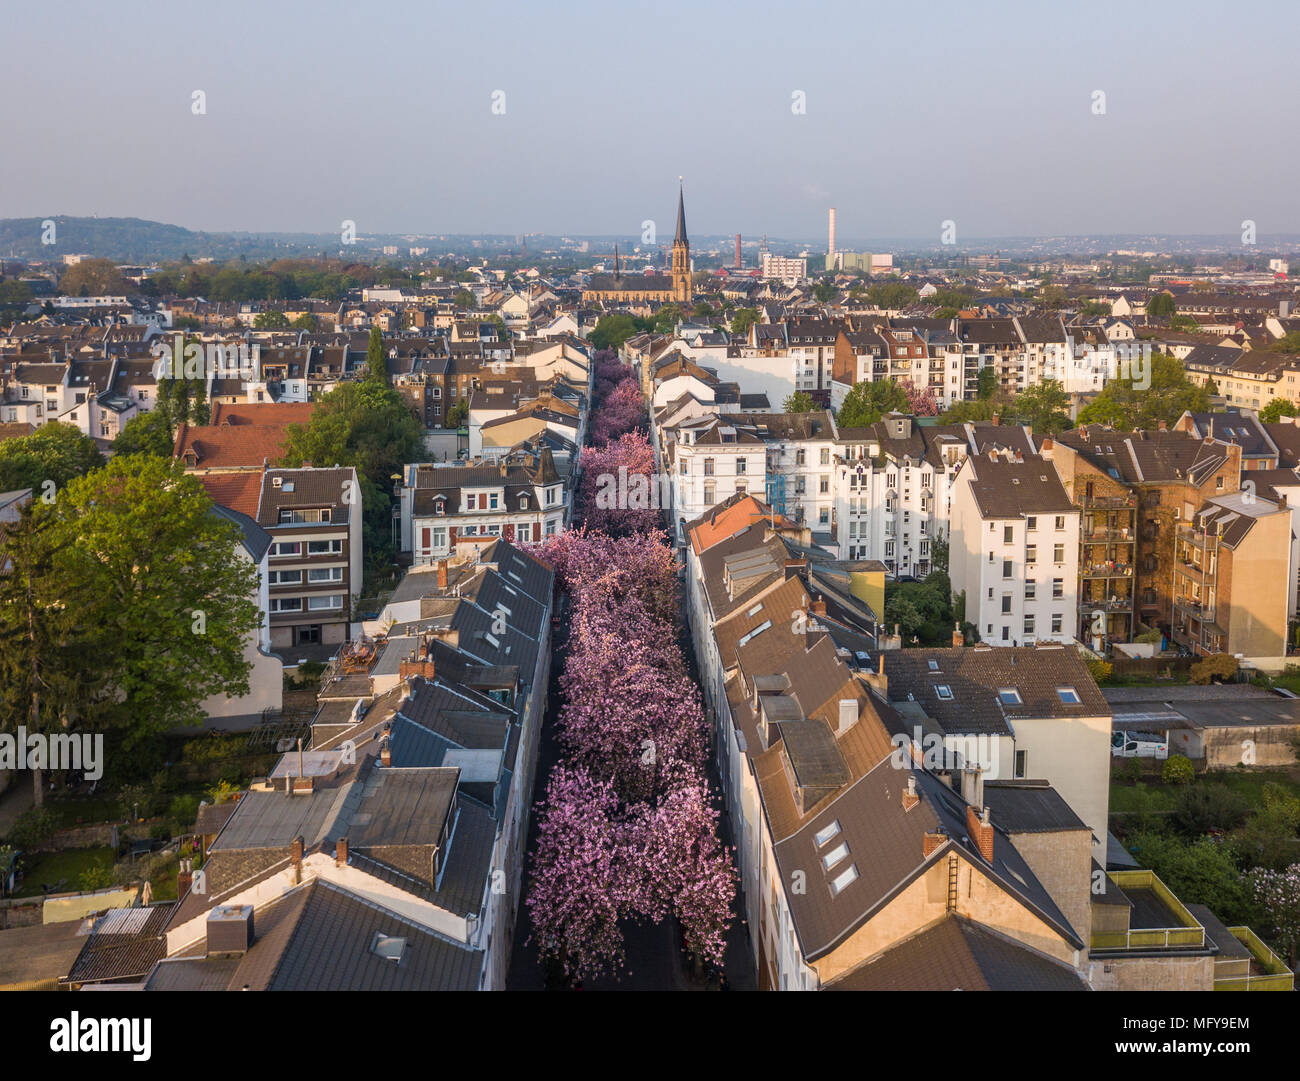 BONN, GERMANY - APRIL 21, 2018: Aerial view of Heerstrasse or Cherry Blossom Avenue during peak of sakura blossom in April Stock Photo